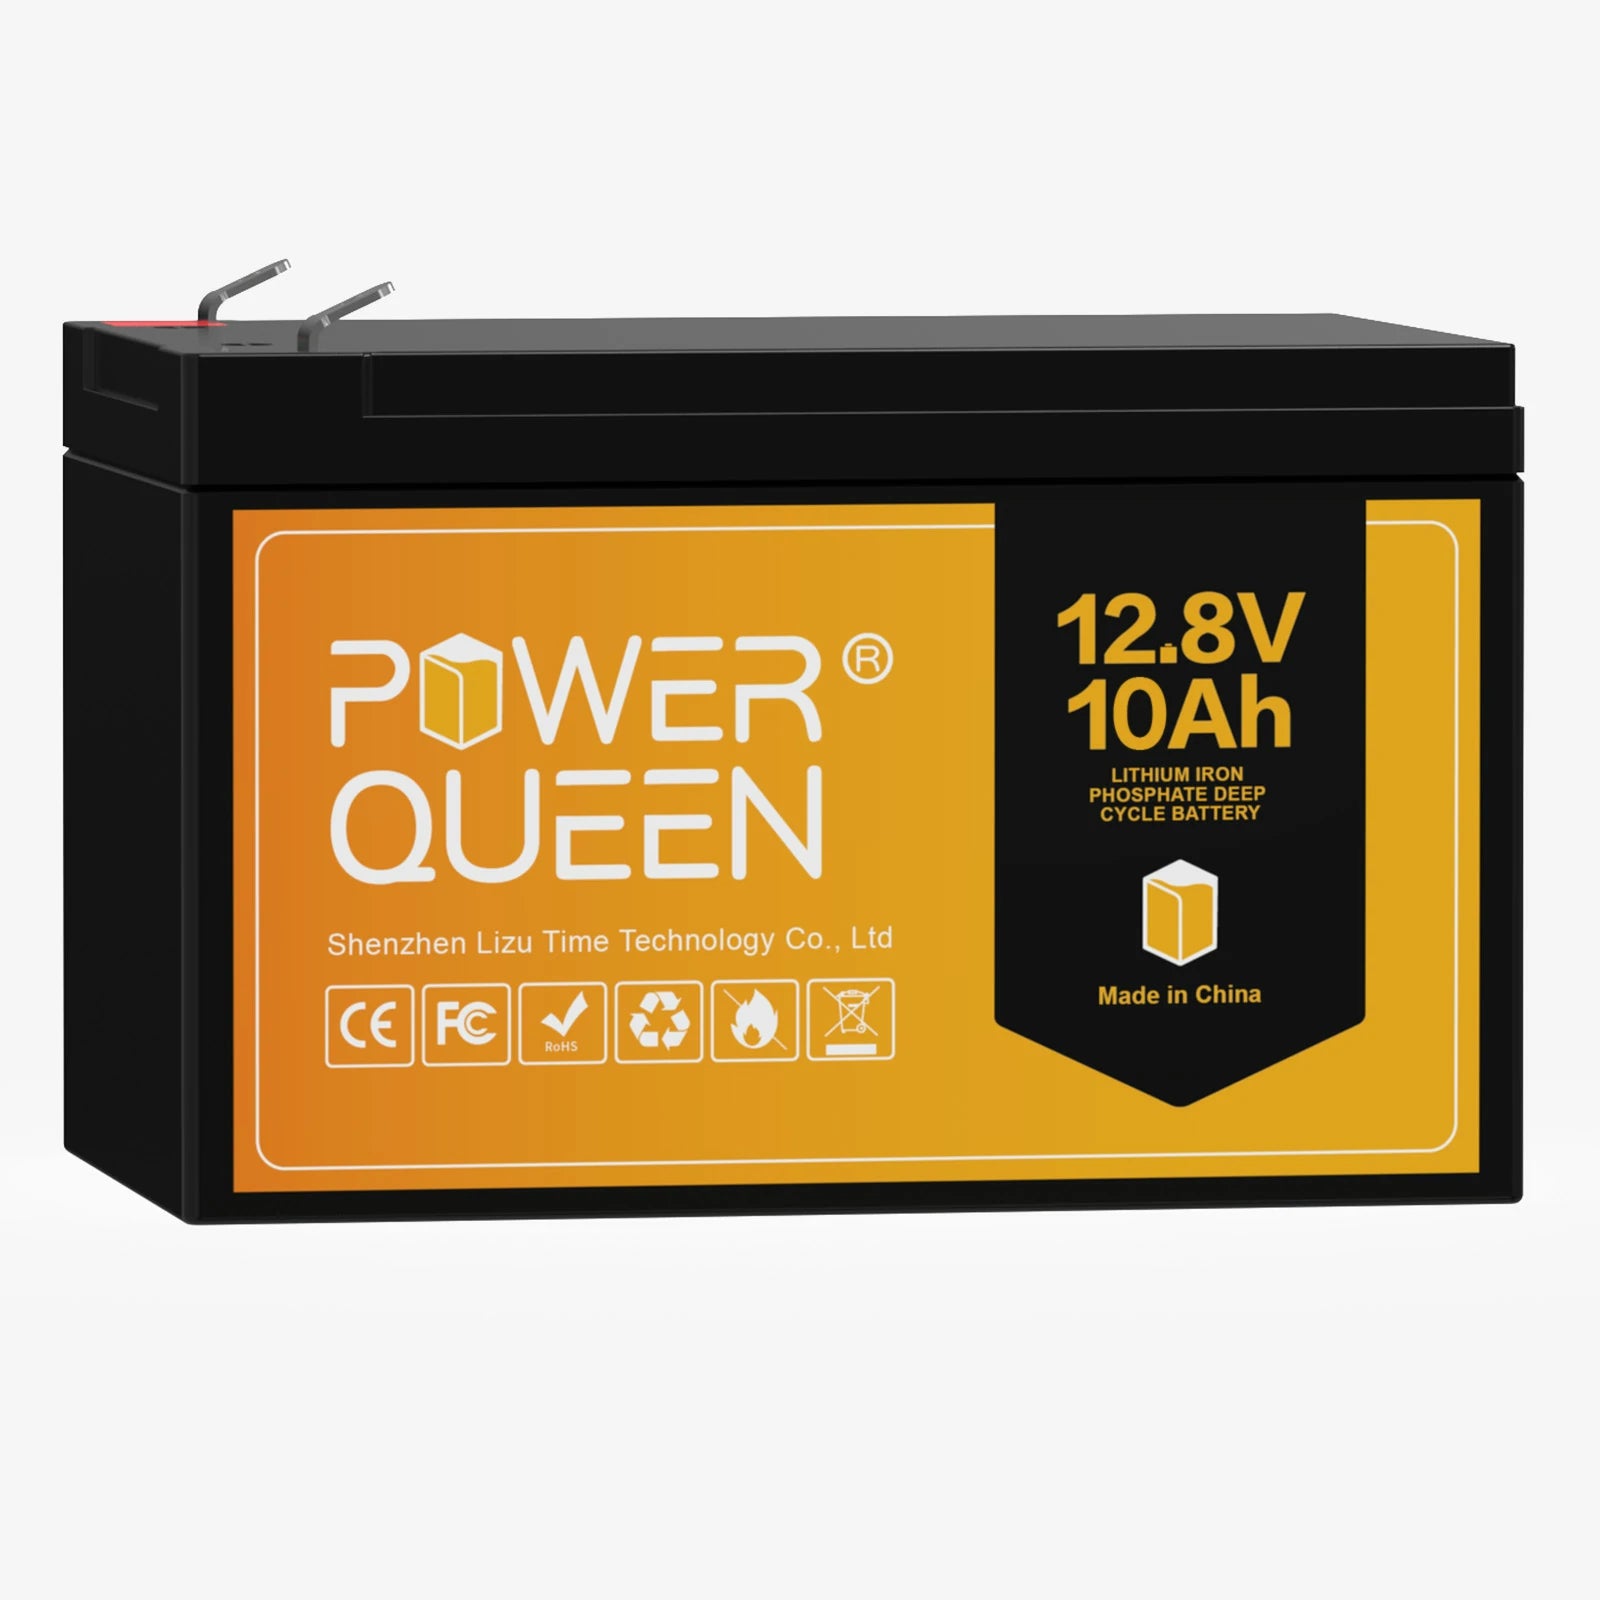  Power Queen 12V 100Ah LiFePO4 Battery, 1280Wh Lithium Battery  with 100A BMS, Up to 15000 Rechargeable Cycles, Support in Series/Parallel,  Perfect for RV Camping, Trolling Motor, Solar Power Storage : Automotive